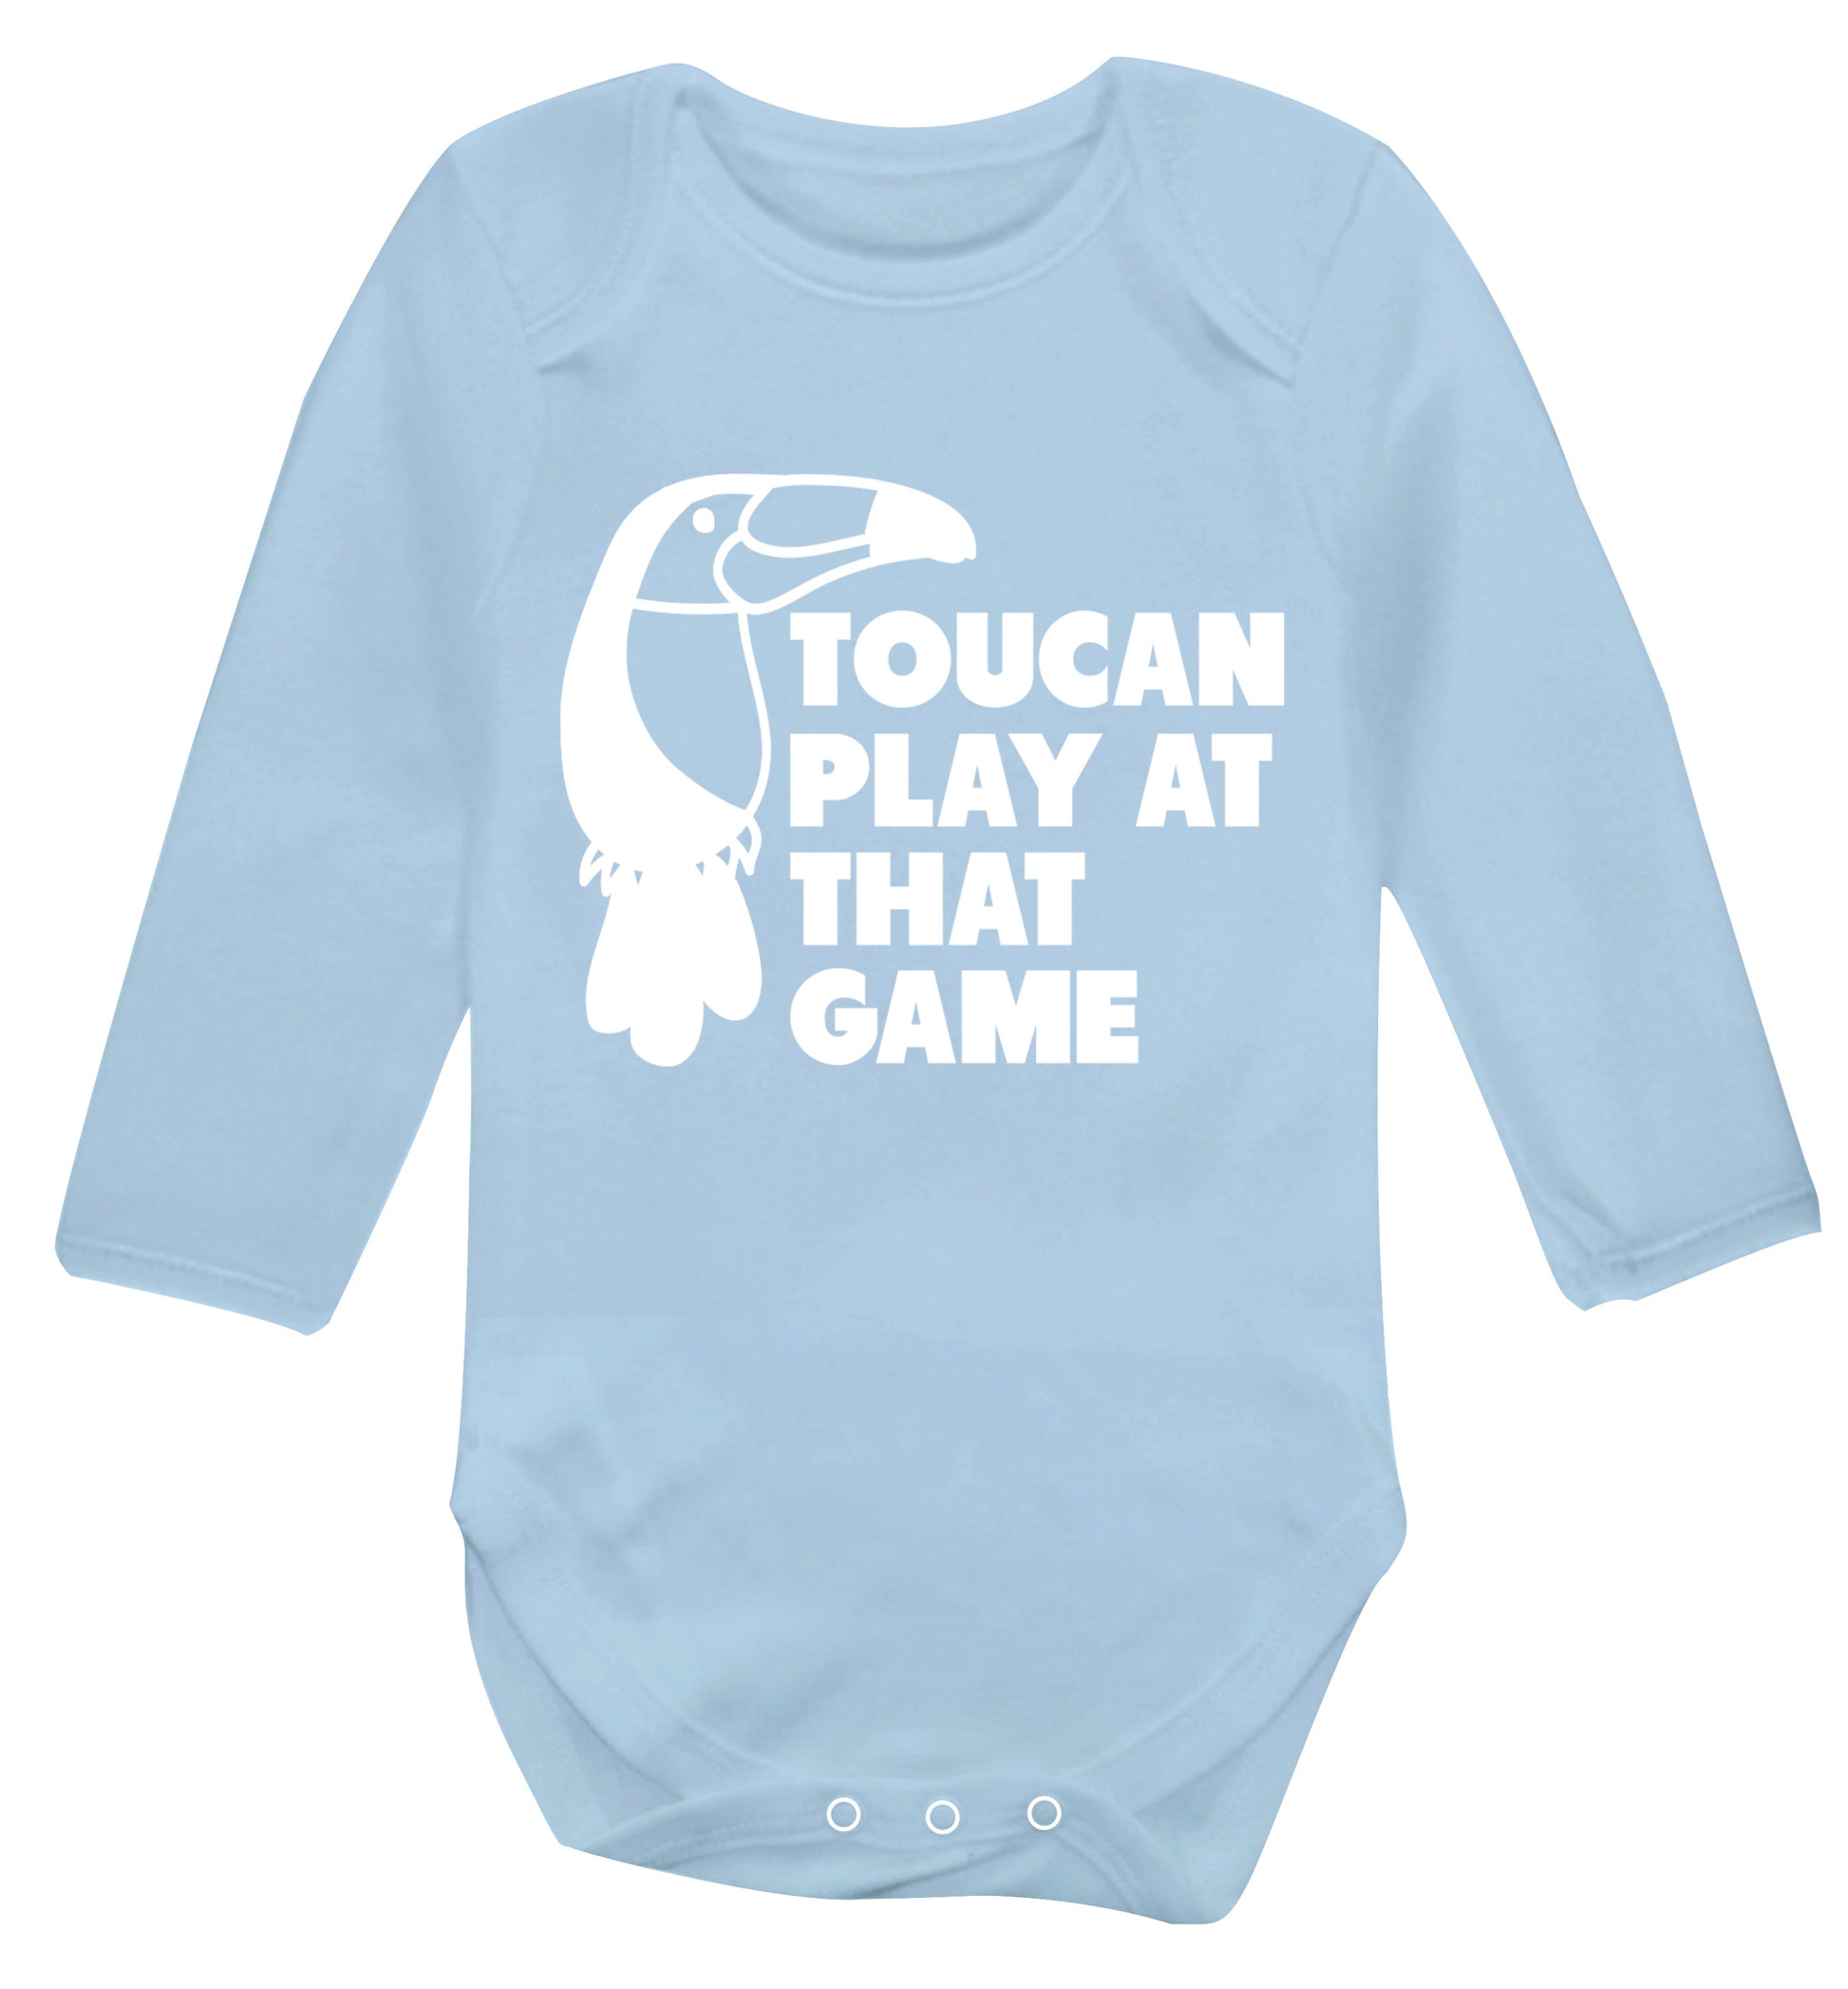 Toucan play at that game Baby Vest long sleeved pale blue 6-12 months